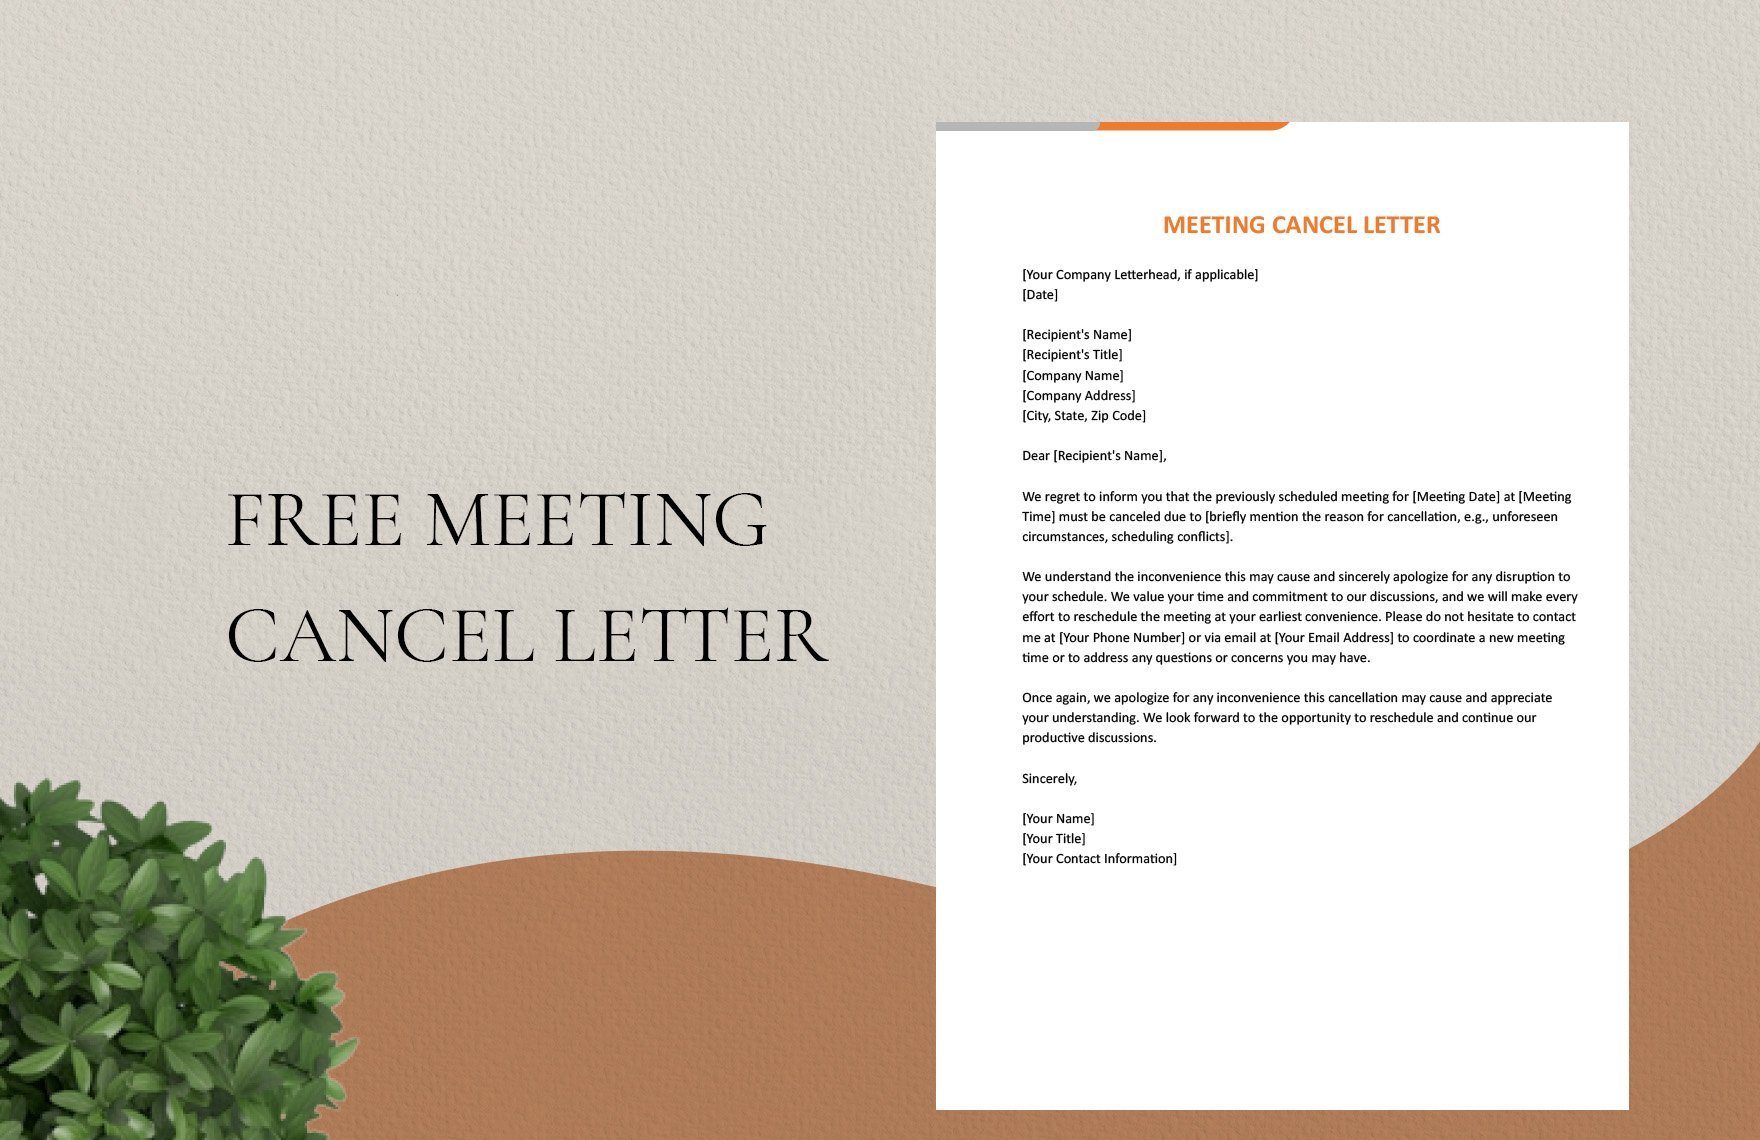 Free Meeting Cancel Letter